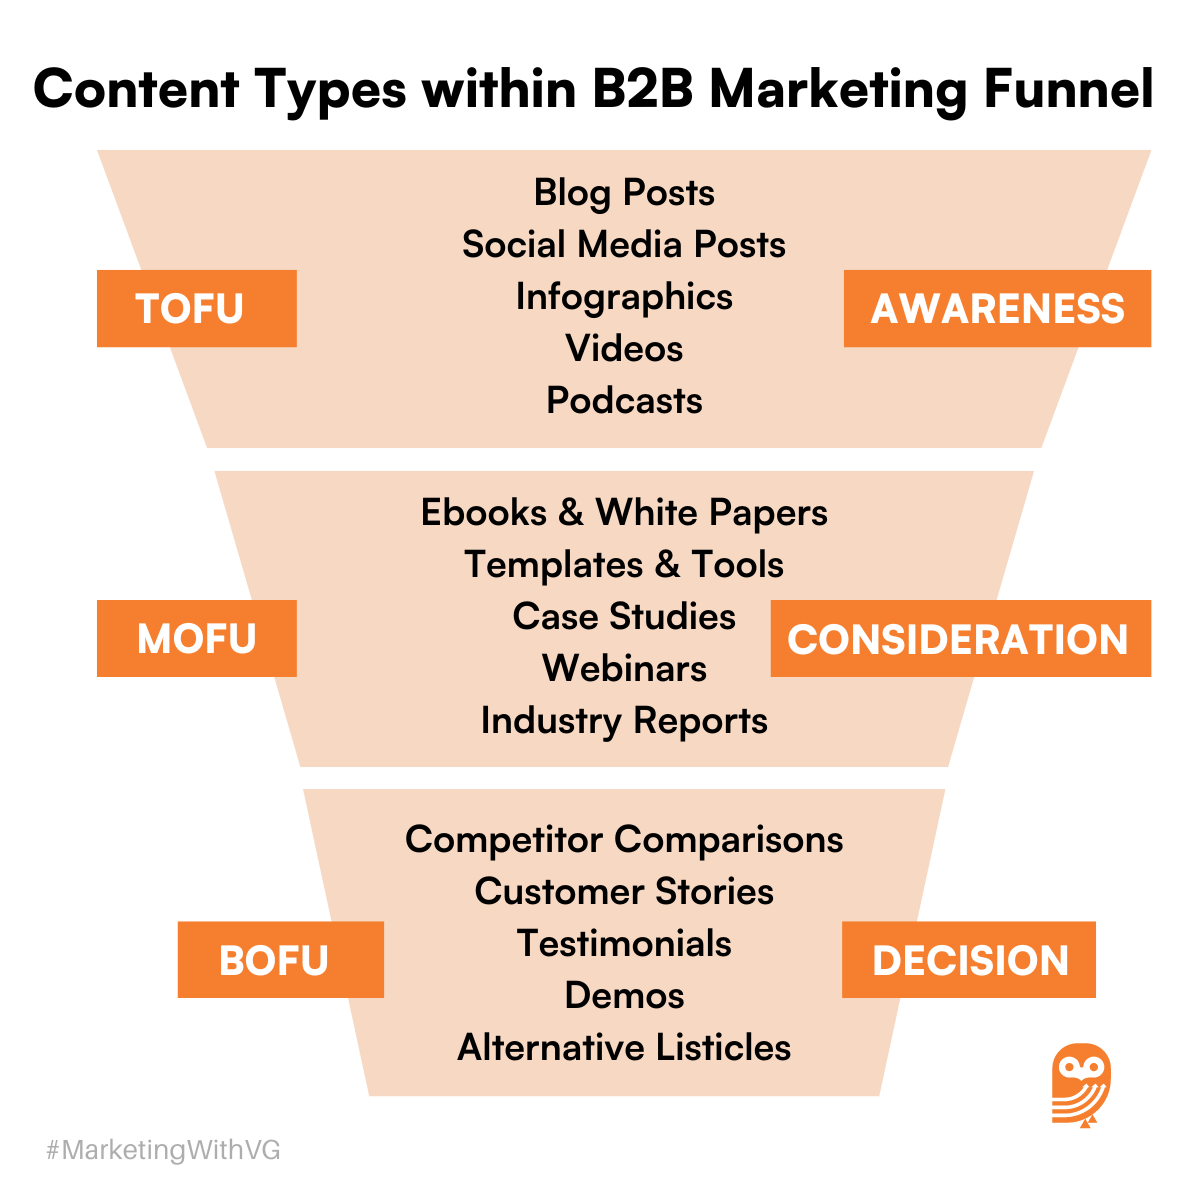 Content Types within B2B Marketing Funnel